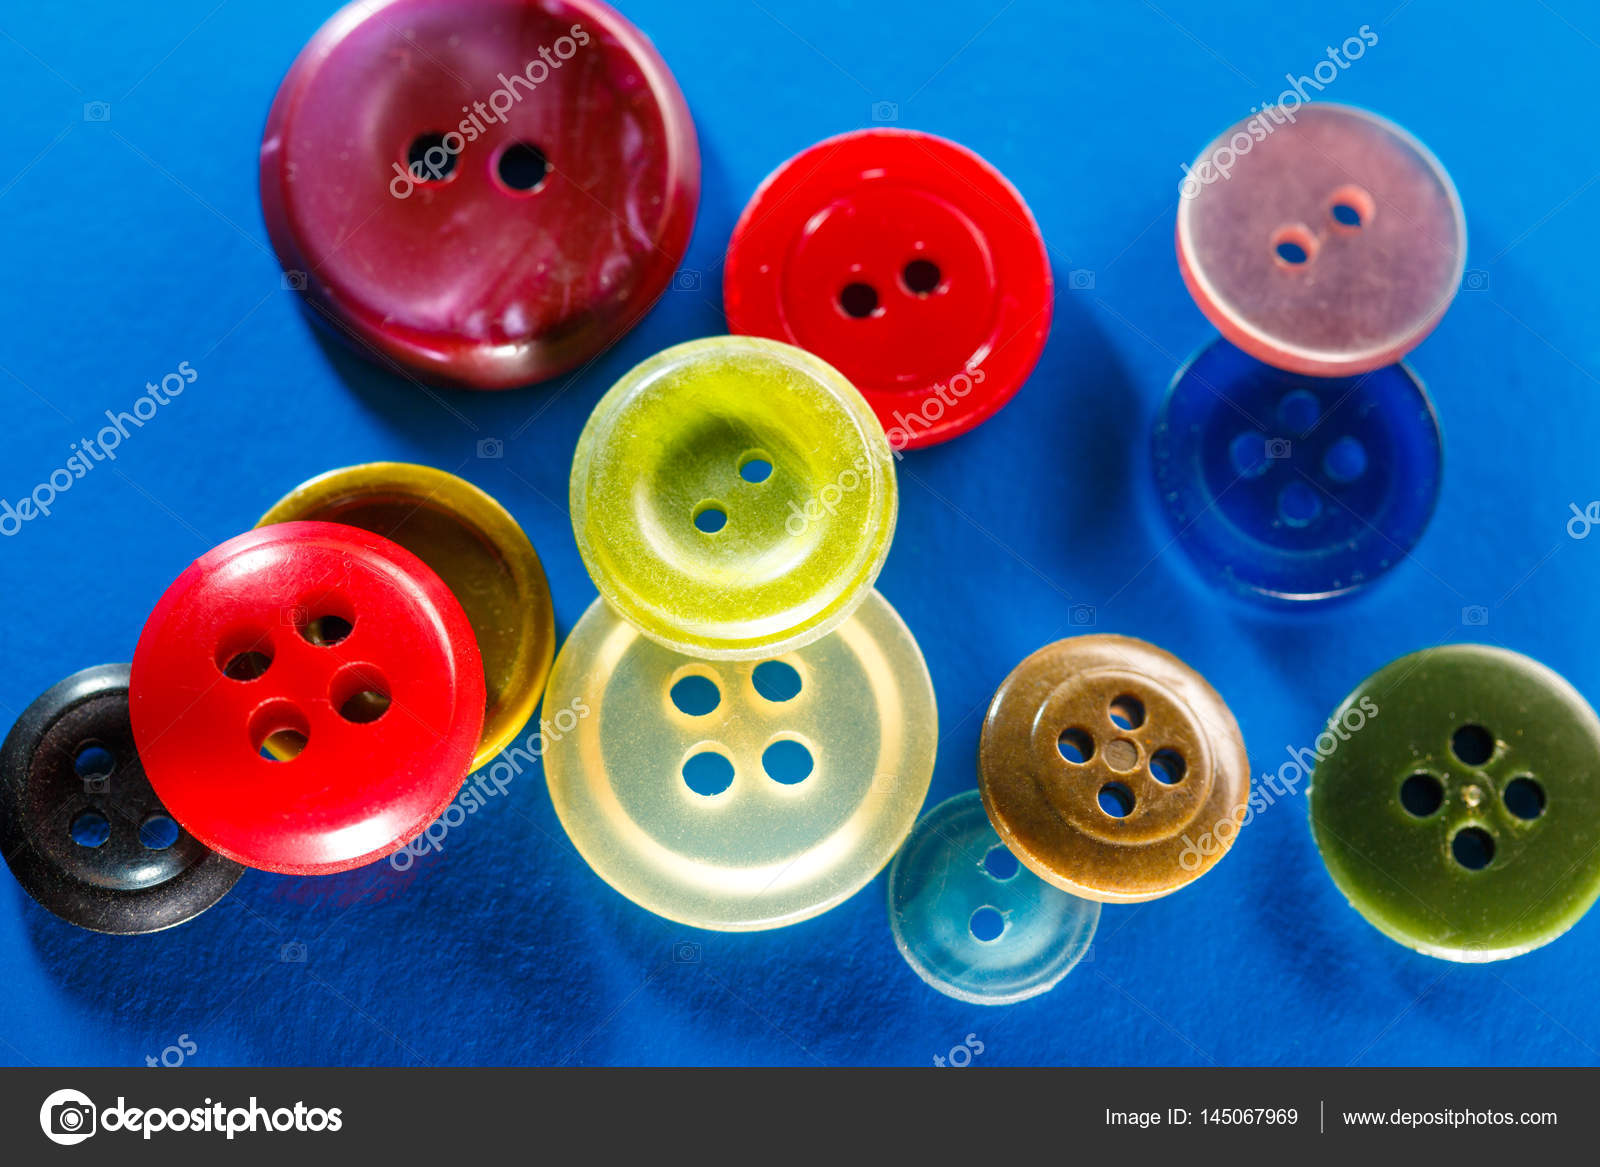 Colorful Buttons on White Background, Red, Yellow Green Blue or